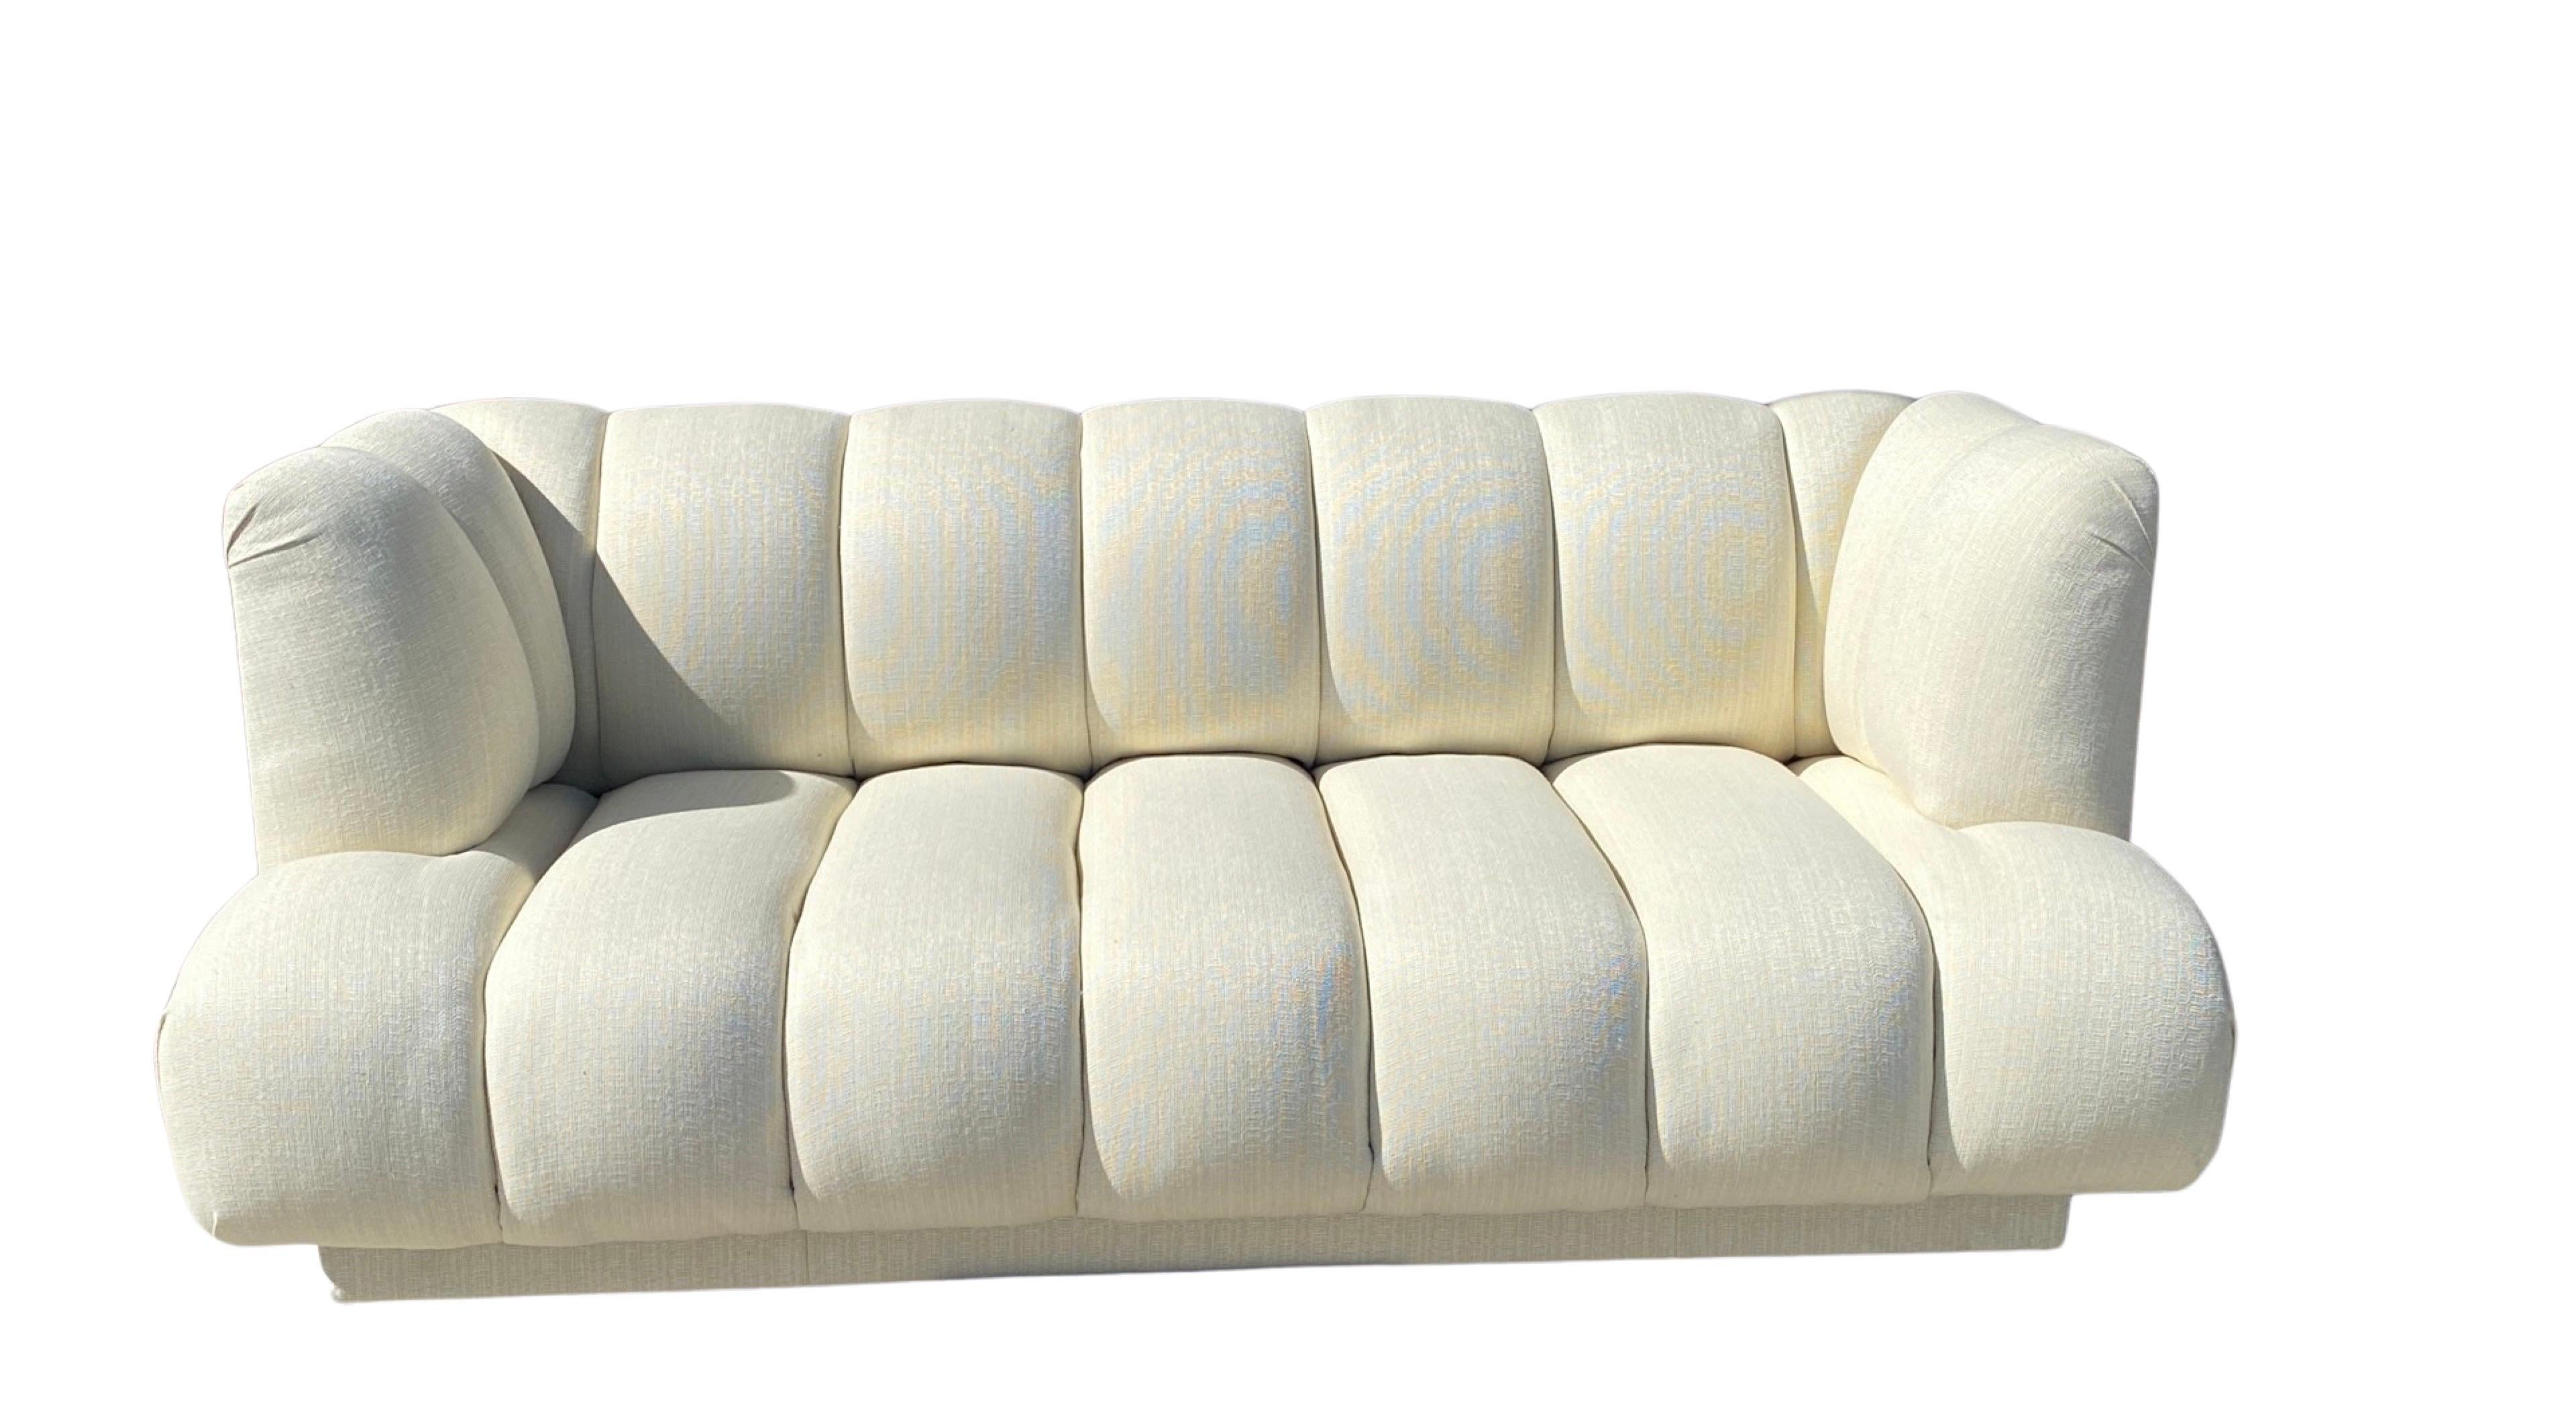 Steve Chase Iconic Channel Sofa From Celebrity Estate in New Creme Upholstery  For Sale 7